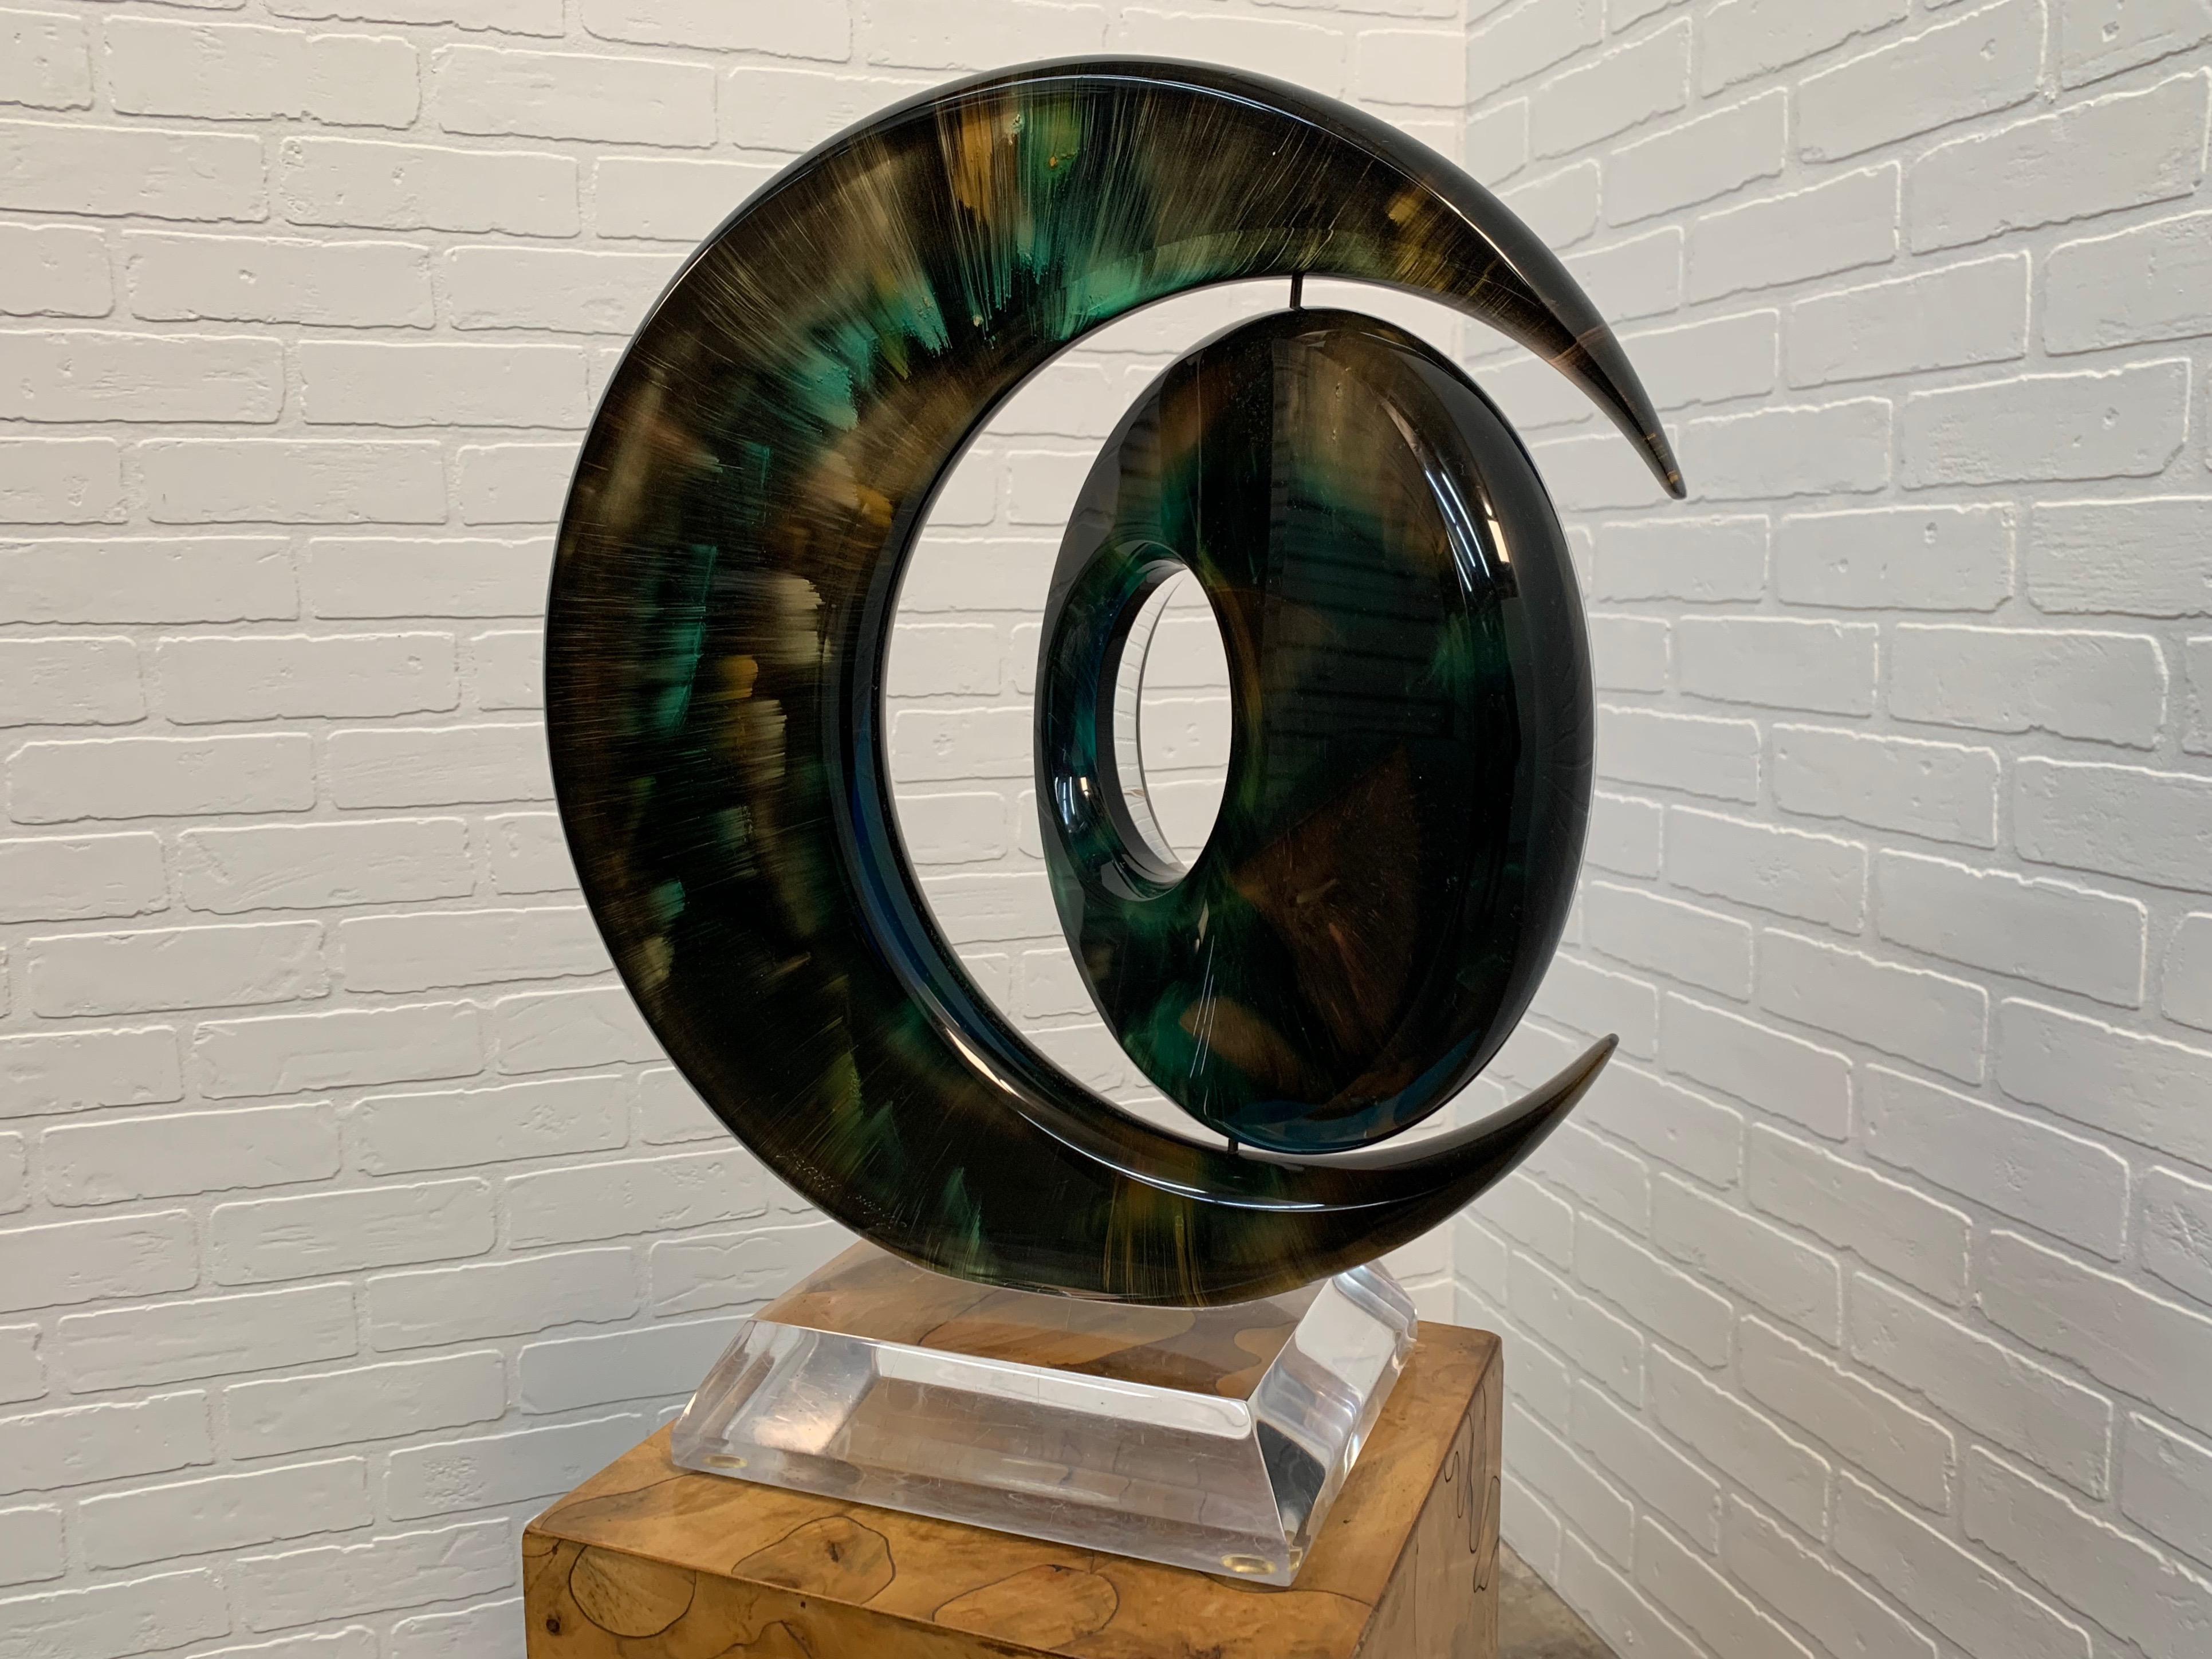 Modern Rotating Sphere within a Crescent Lucite Sculpture by Shlomi Haziza